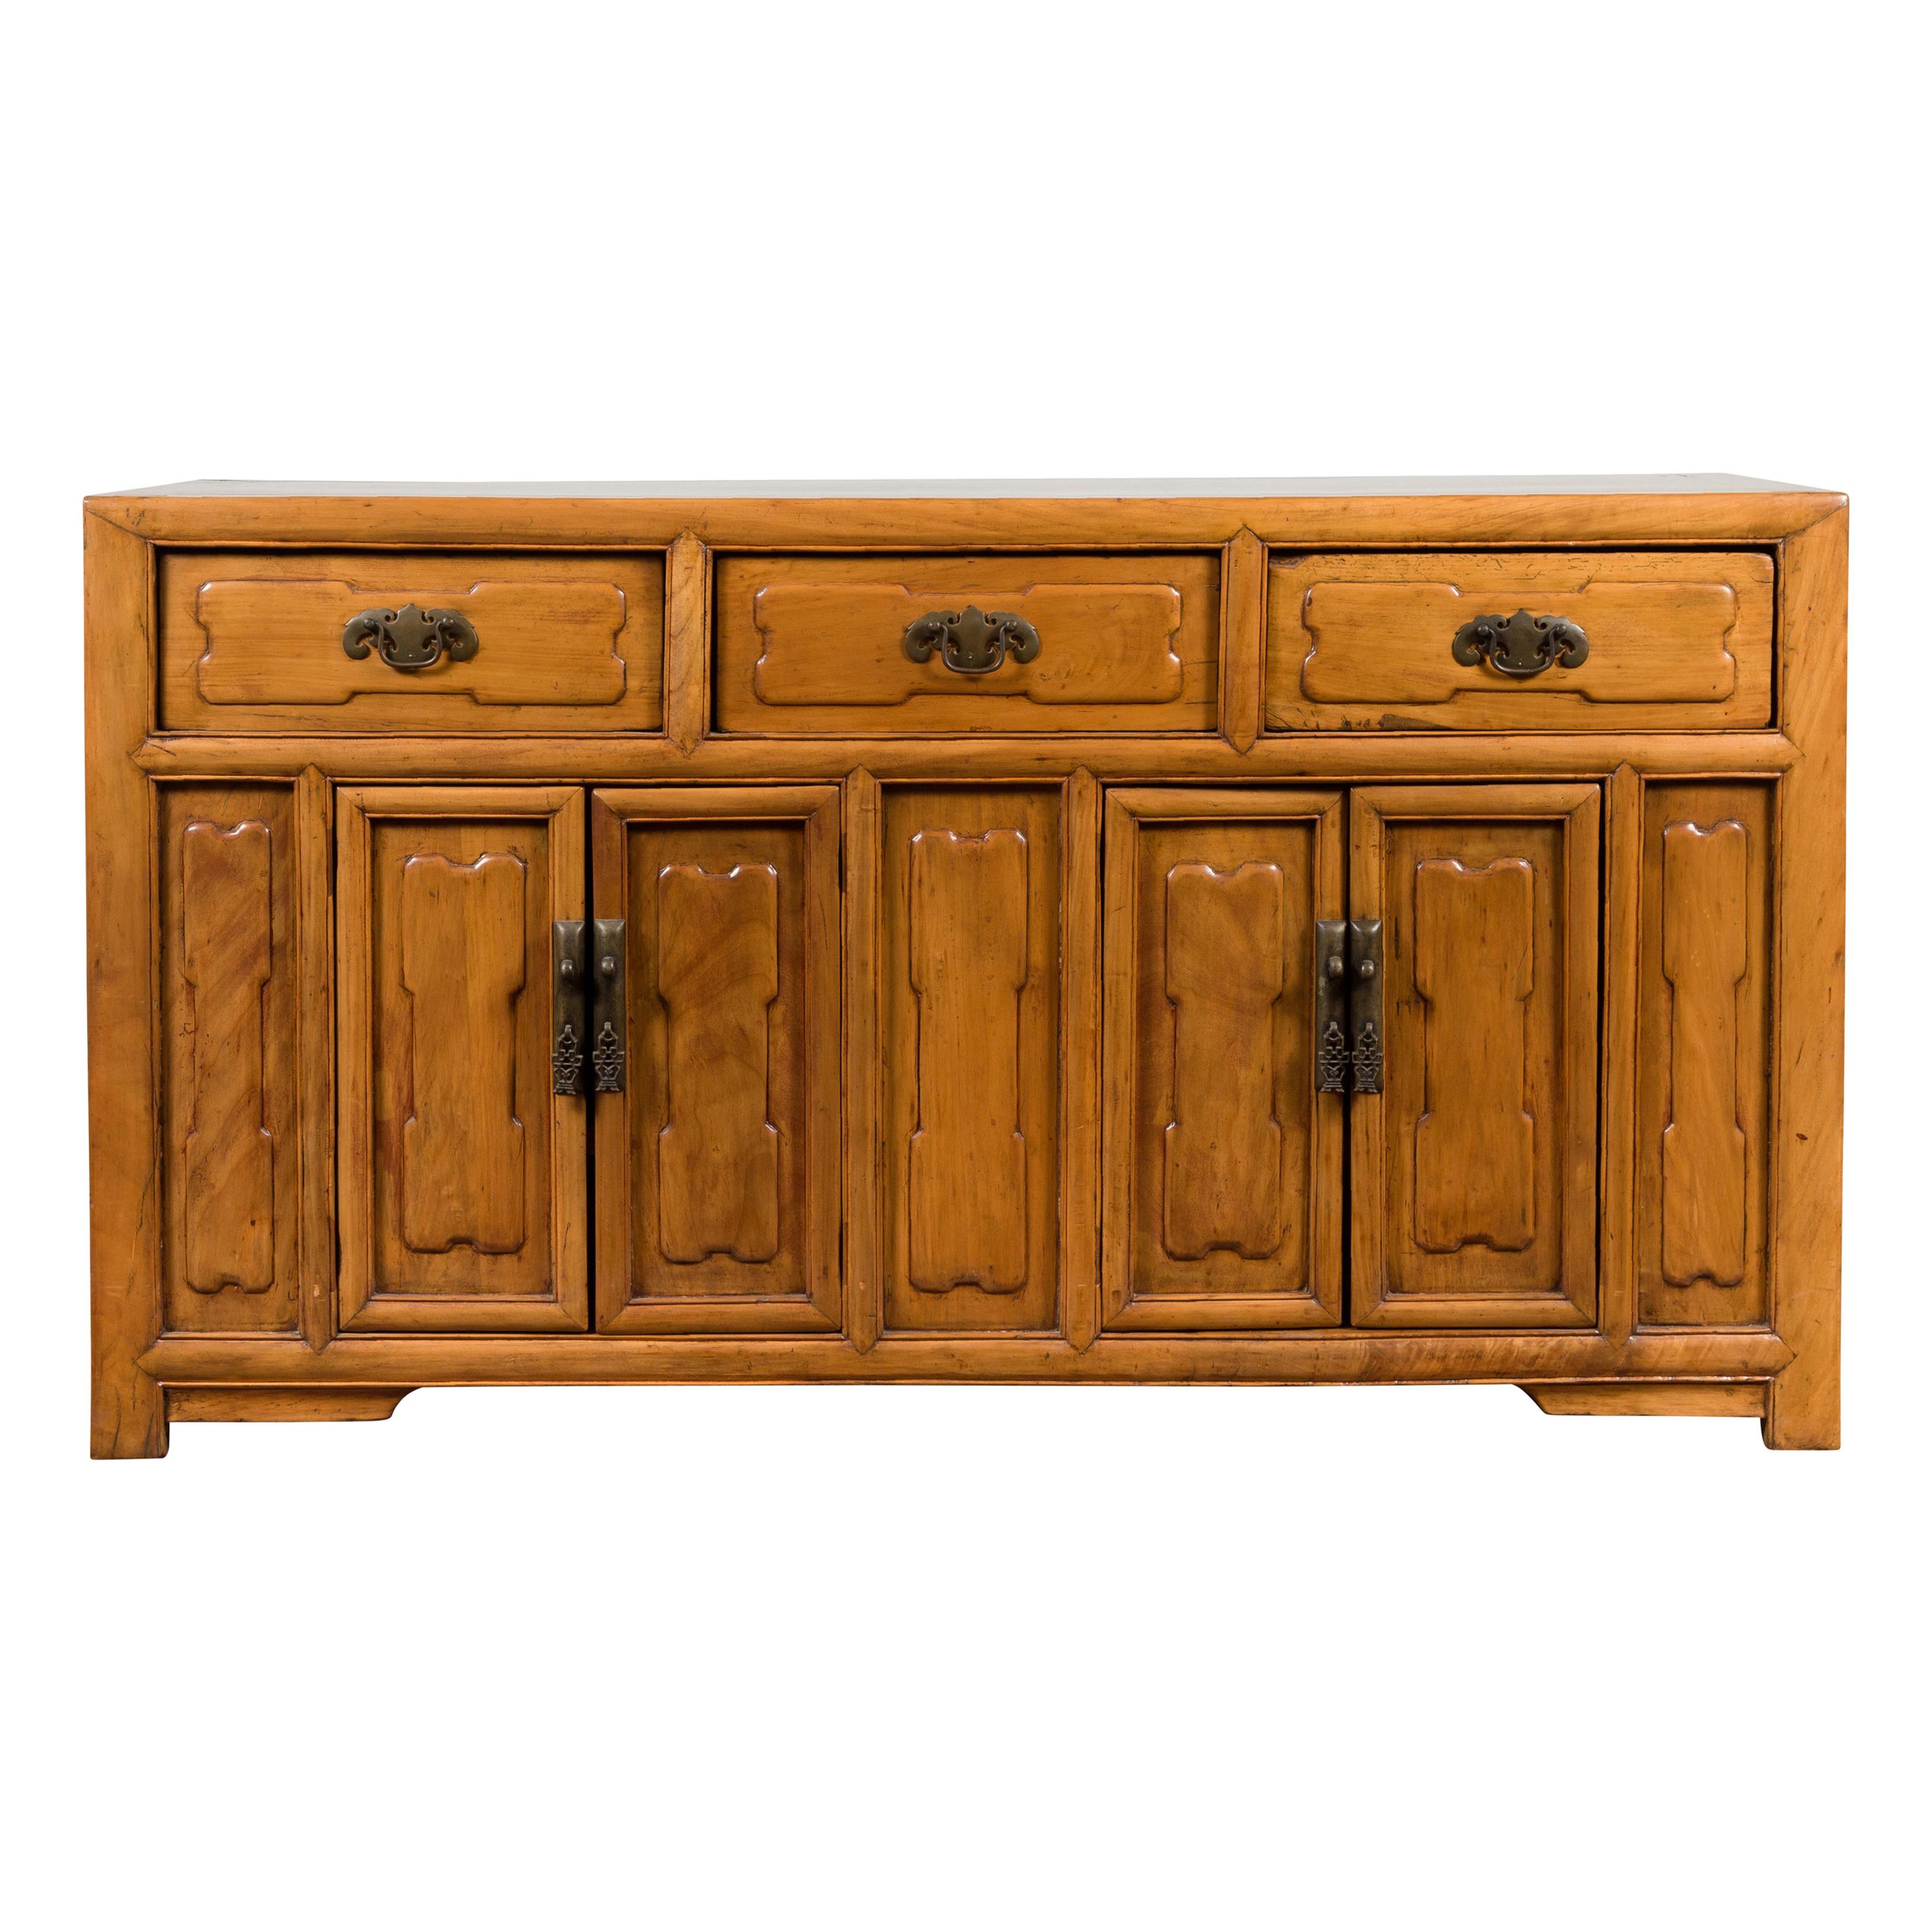 Chinese Early 20th Century Elm Sideboard with Raised Panels, Doors and Drawers For Sale